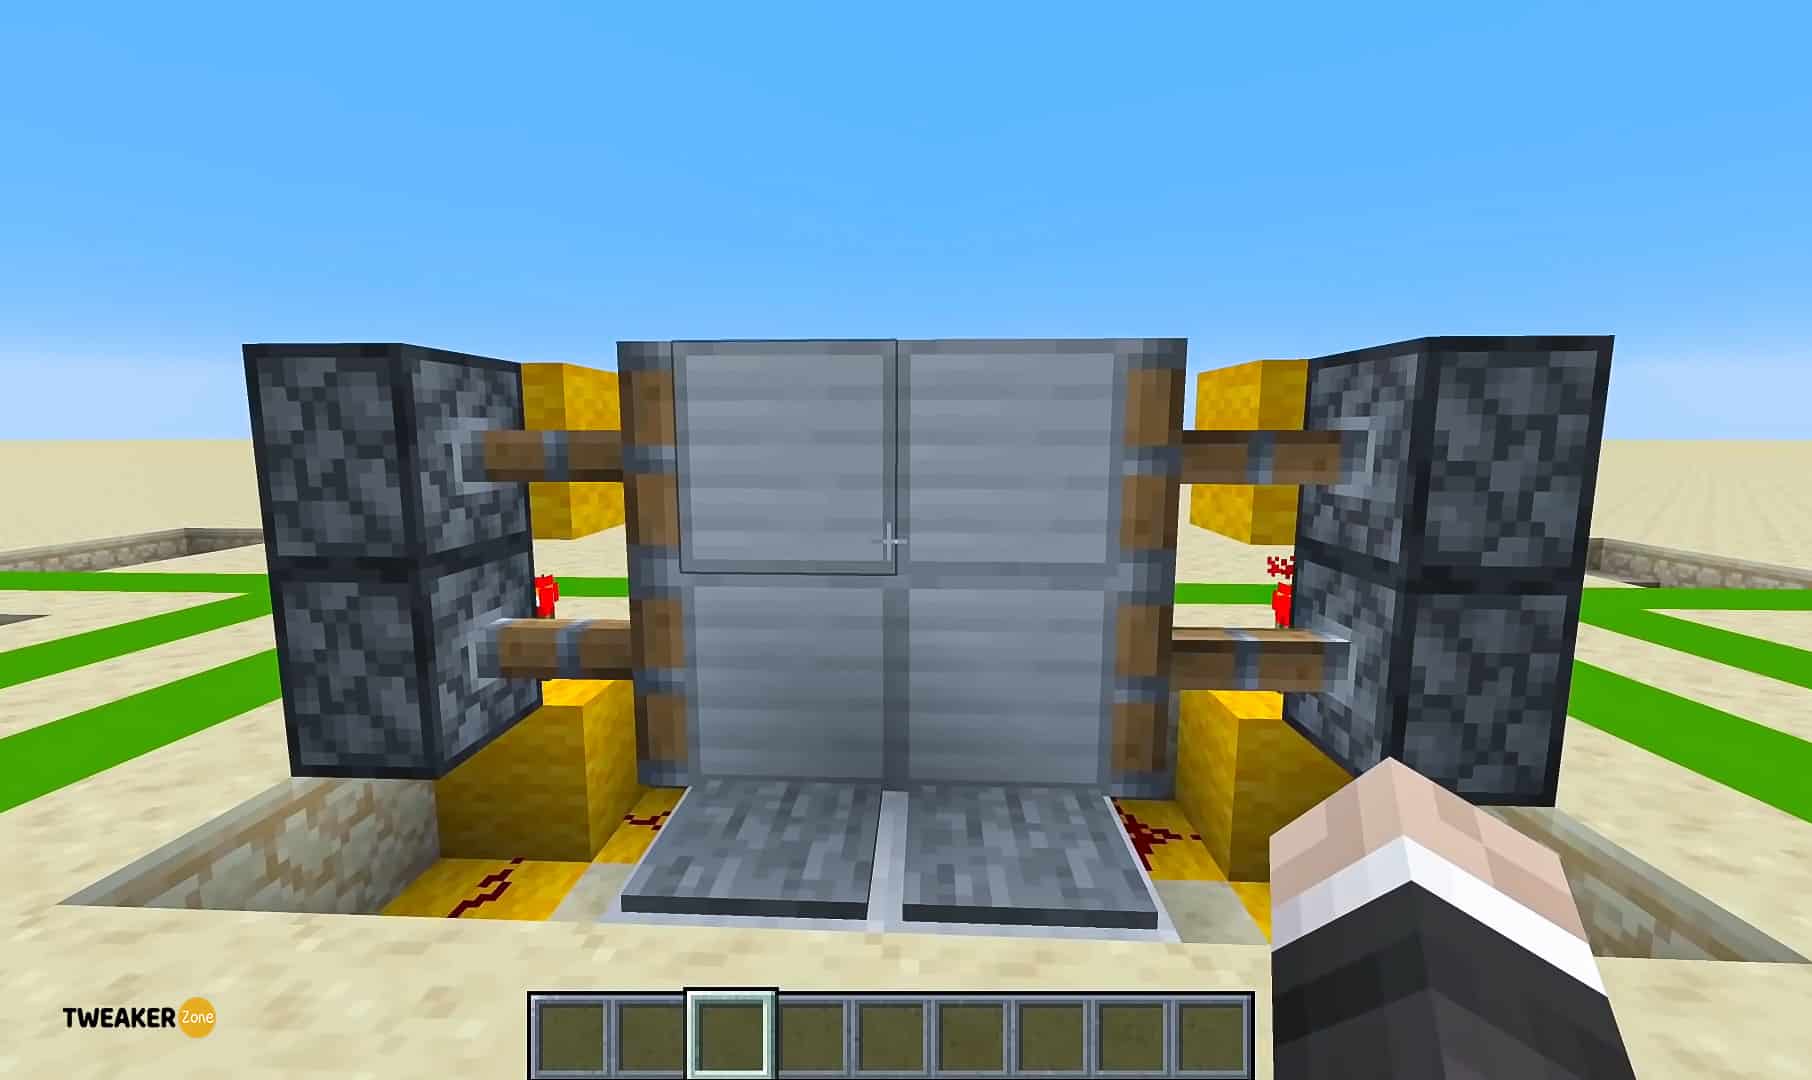 How to Make a Piston in Minecraft